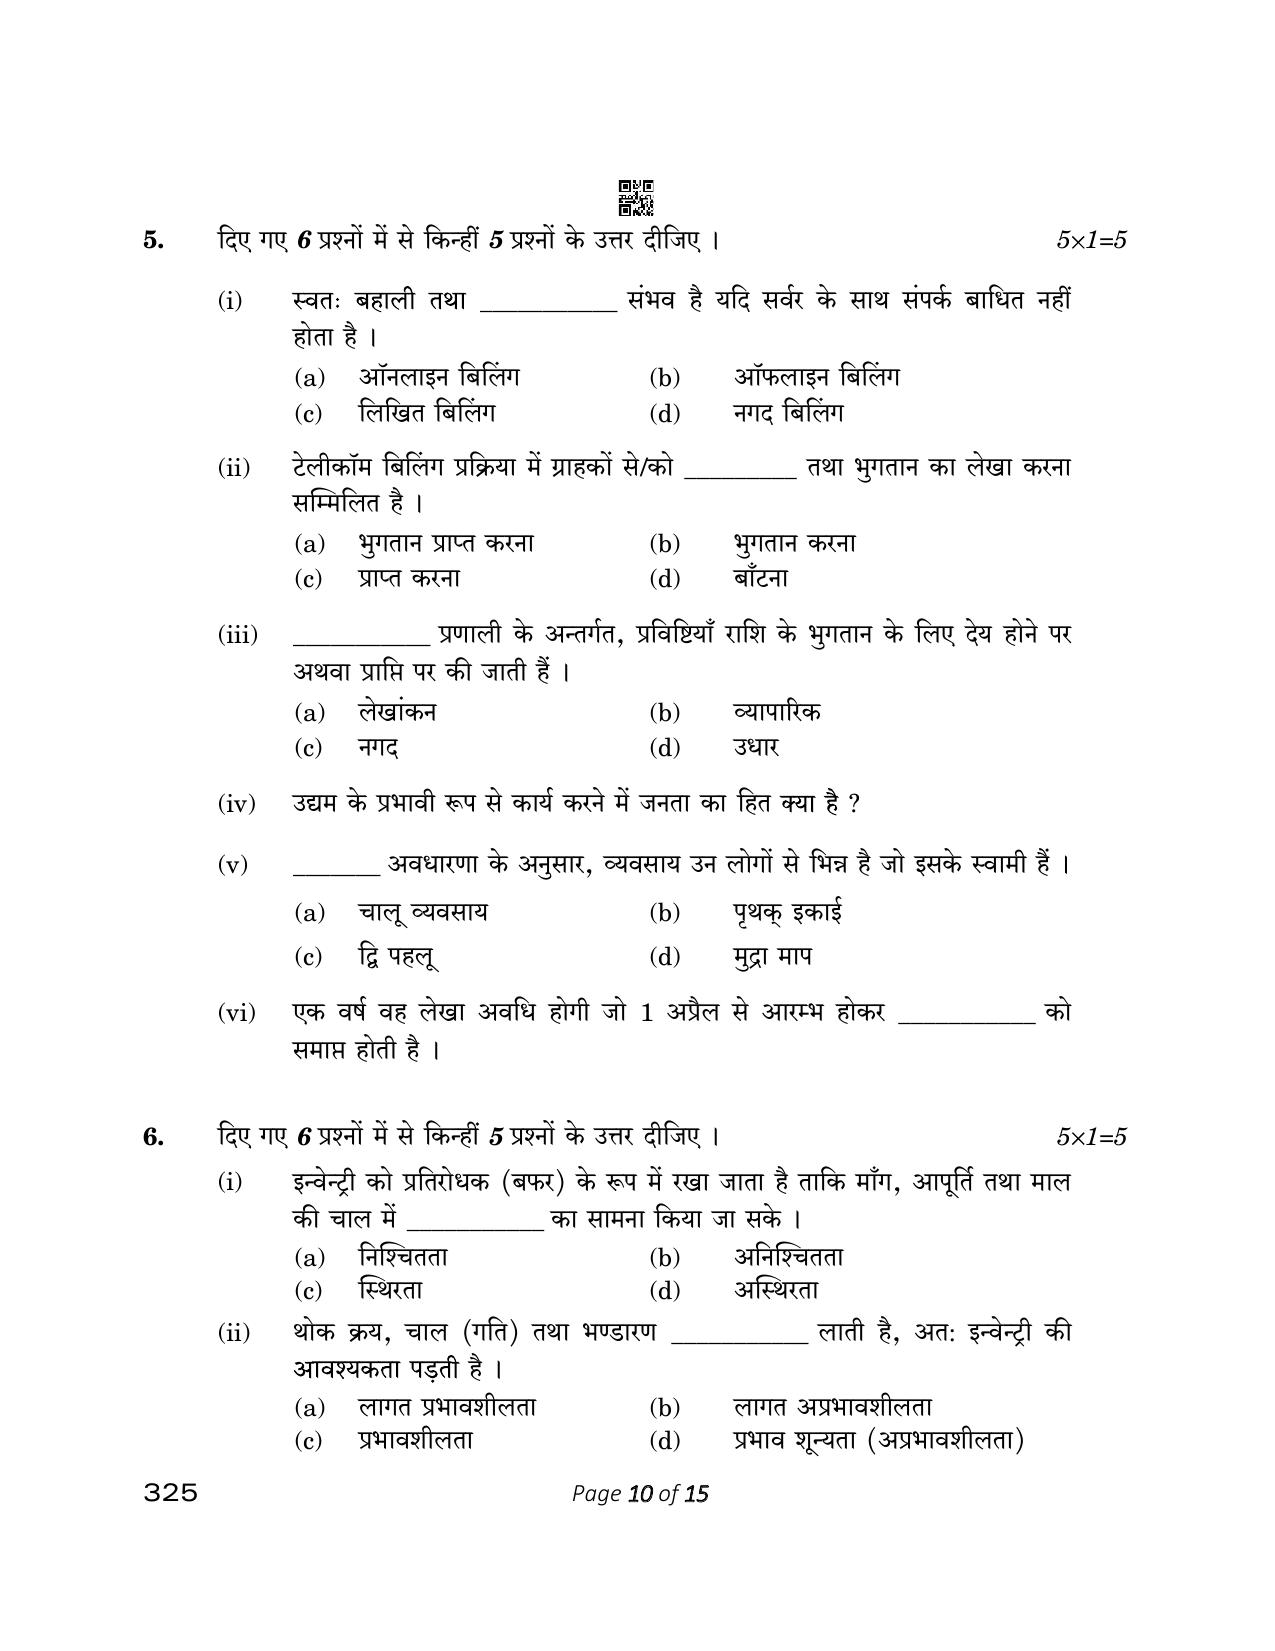 CBSE Class 12 325 Retail 2023 Question Paper - Page 10